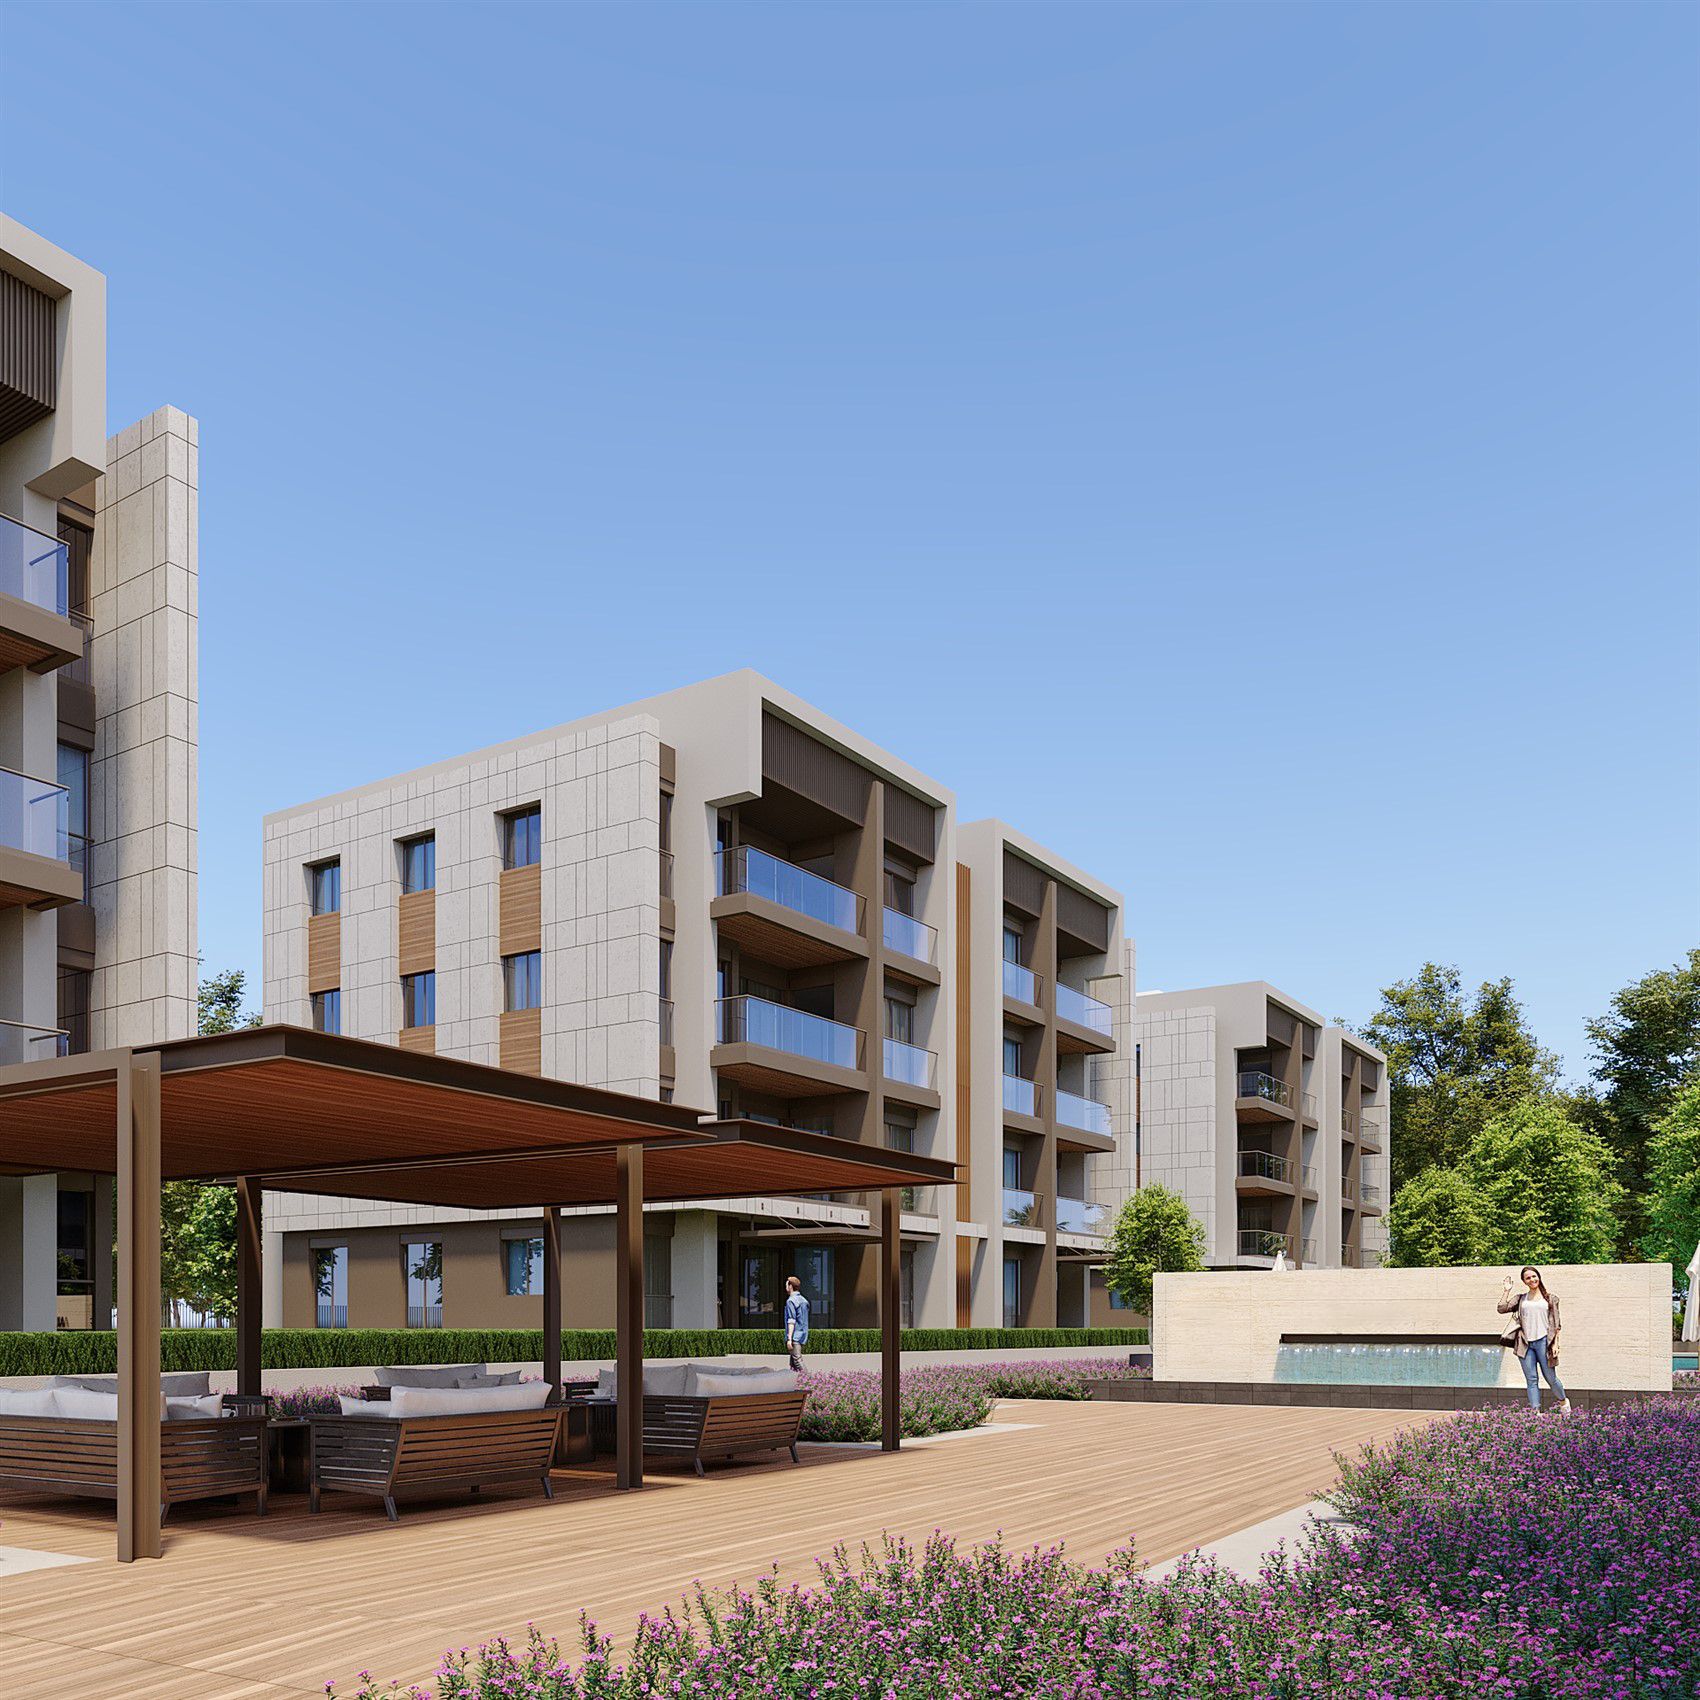 Apartments at the final stage of construction in Antalya, Konyaalti district